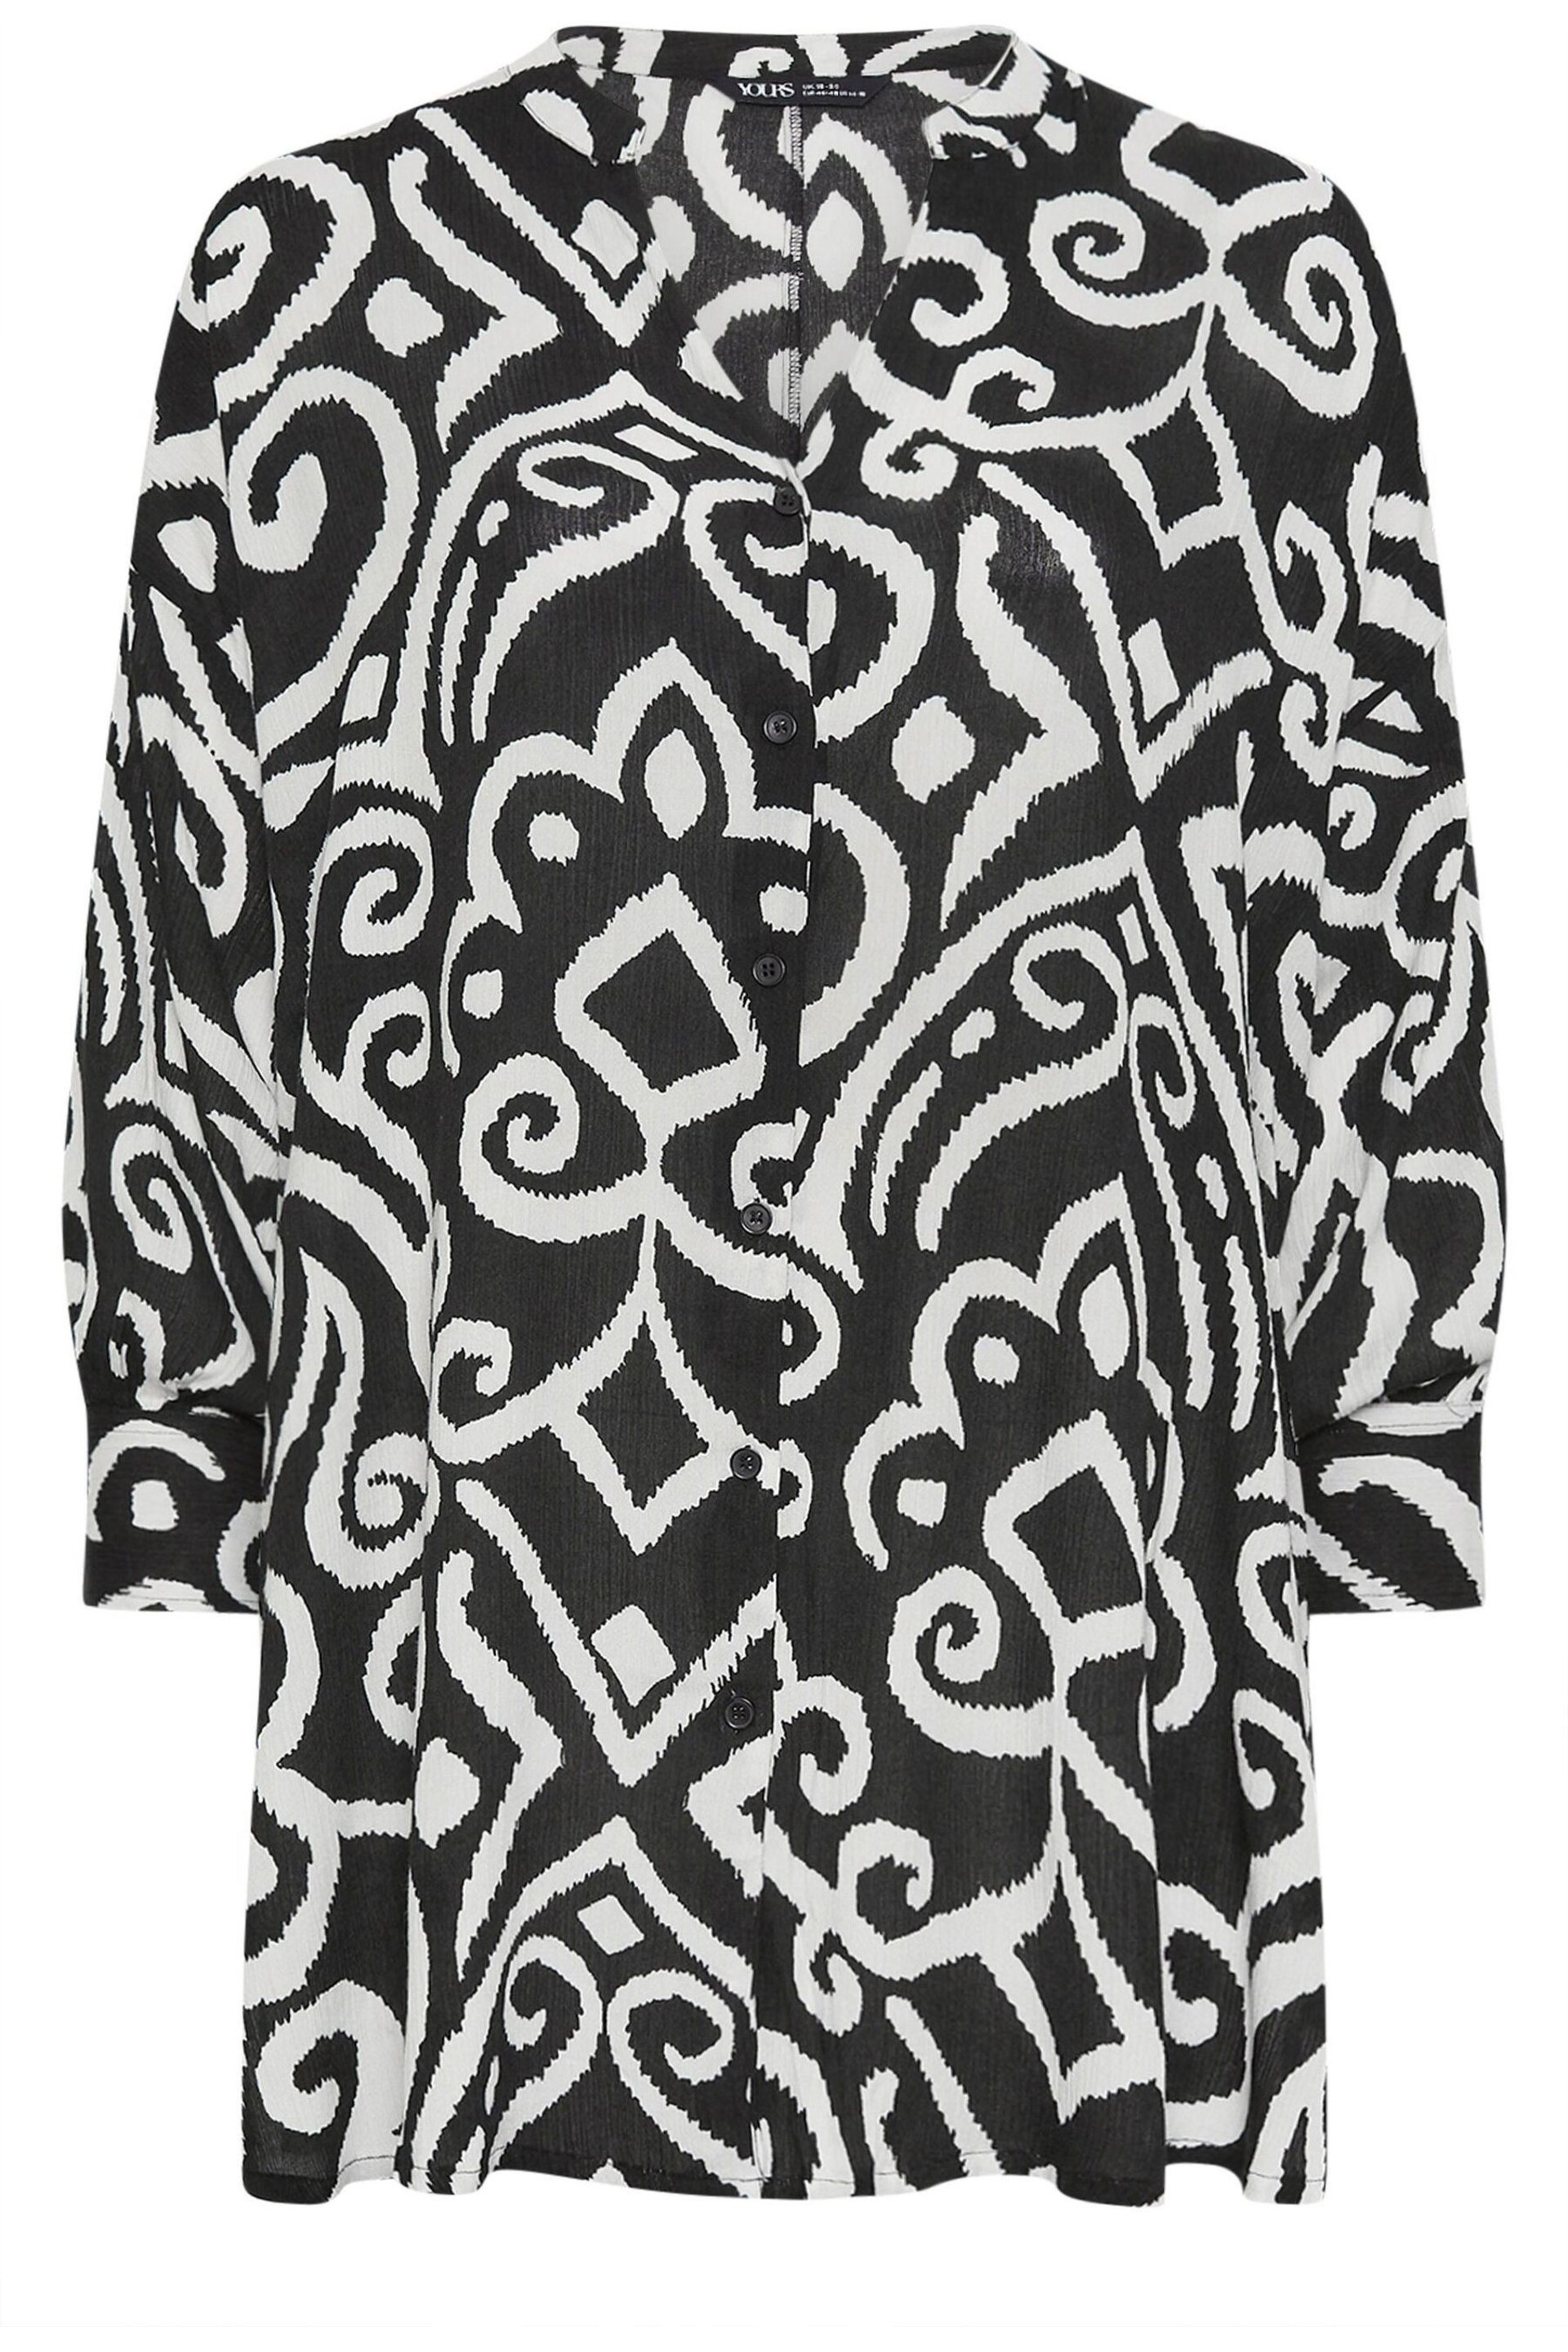 Yours Curve Black Abstract Print Crinkle Beach Shirt - Image 1 of 1